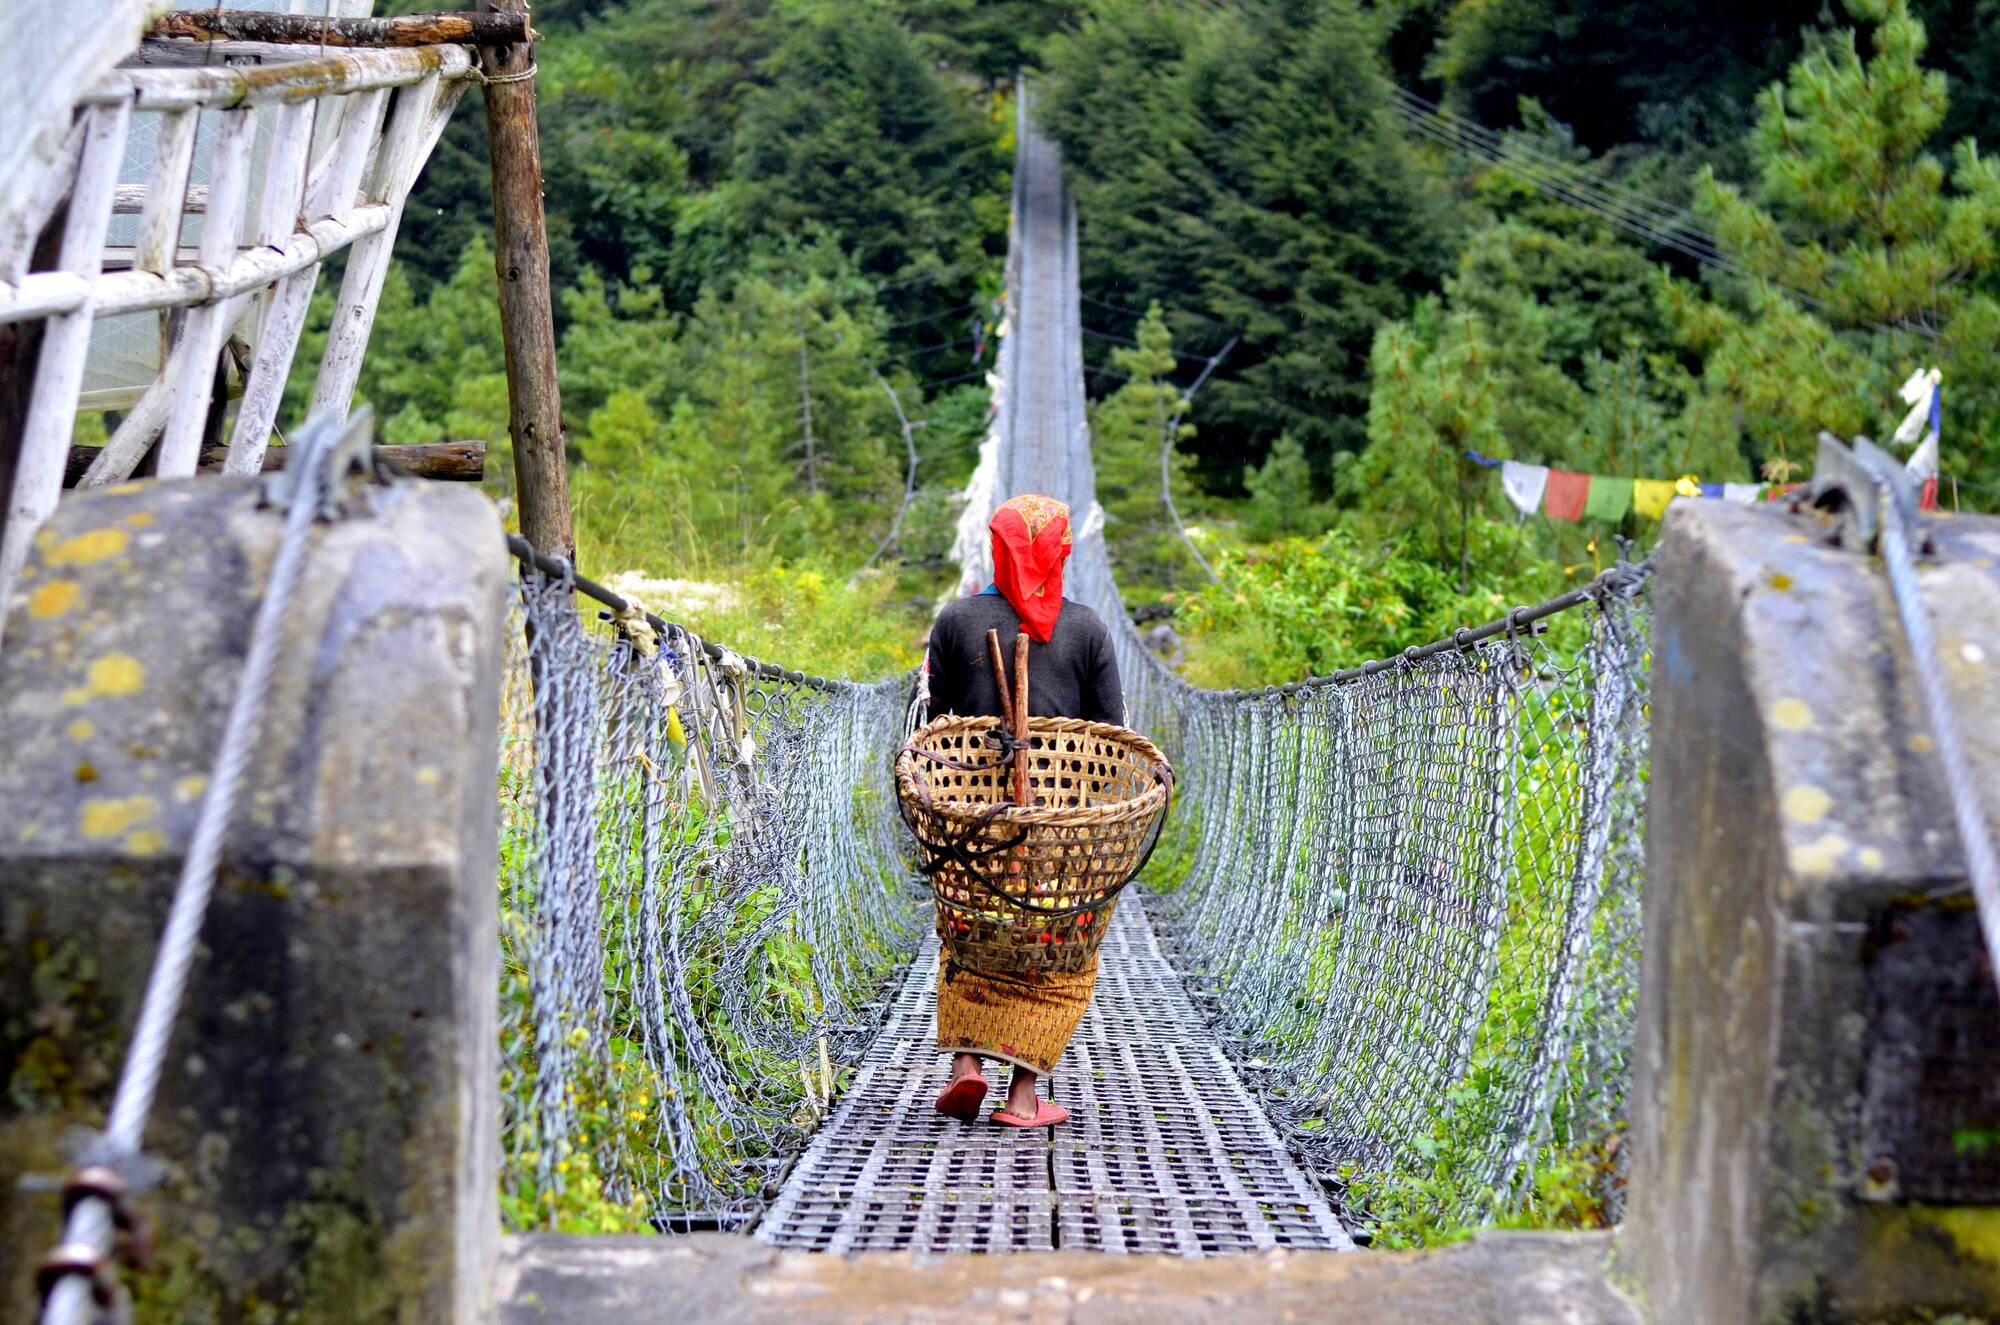 Lady on a suspension bridge, Annapurna, Nepal - By Mountain People